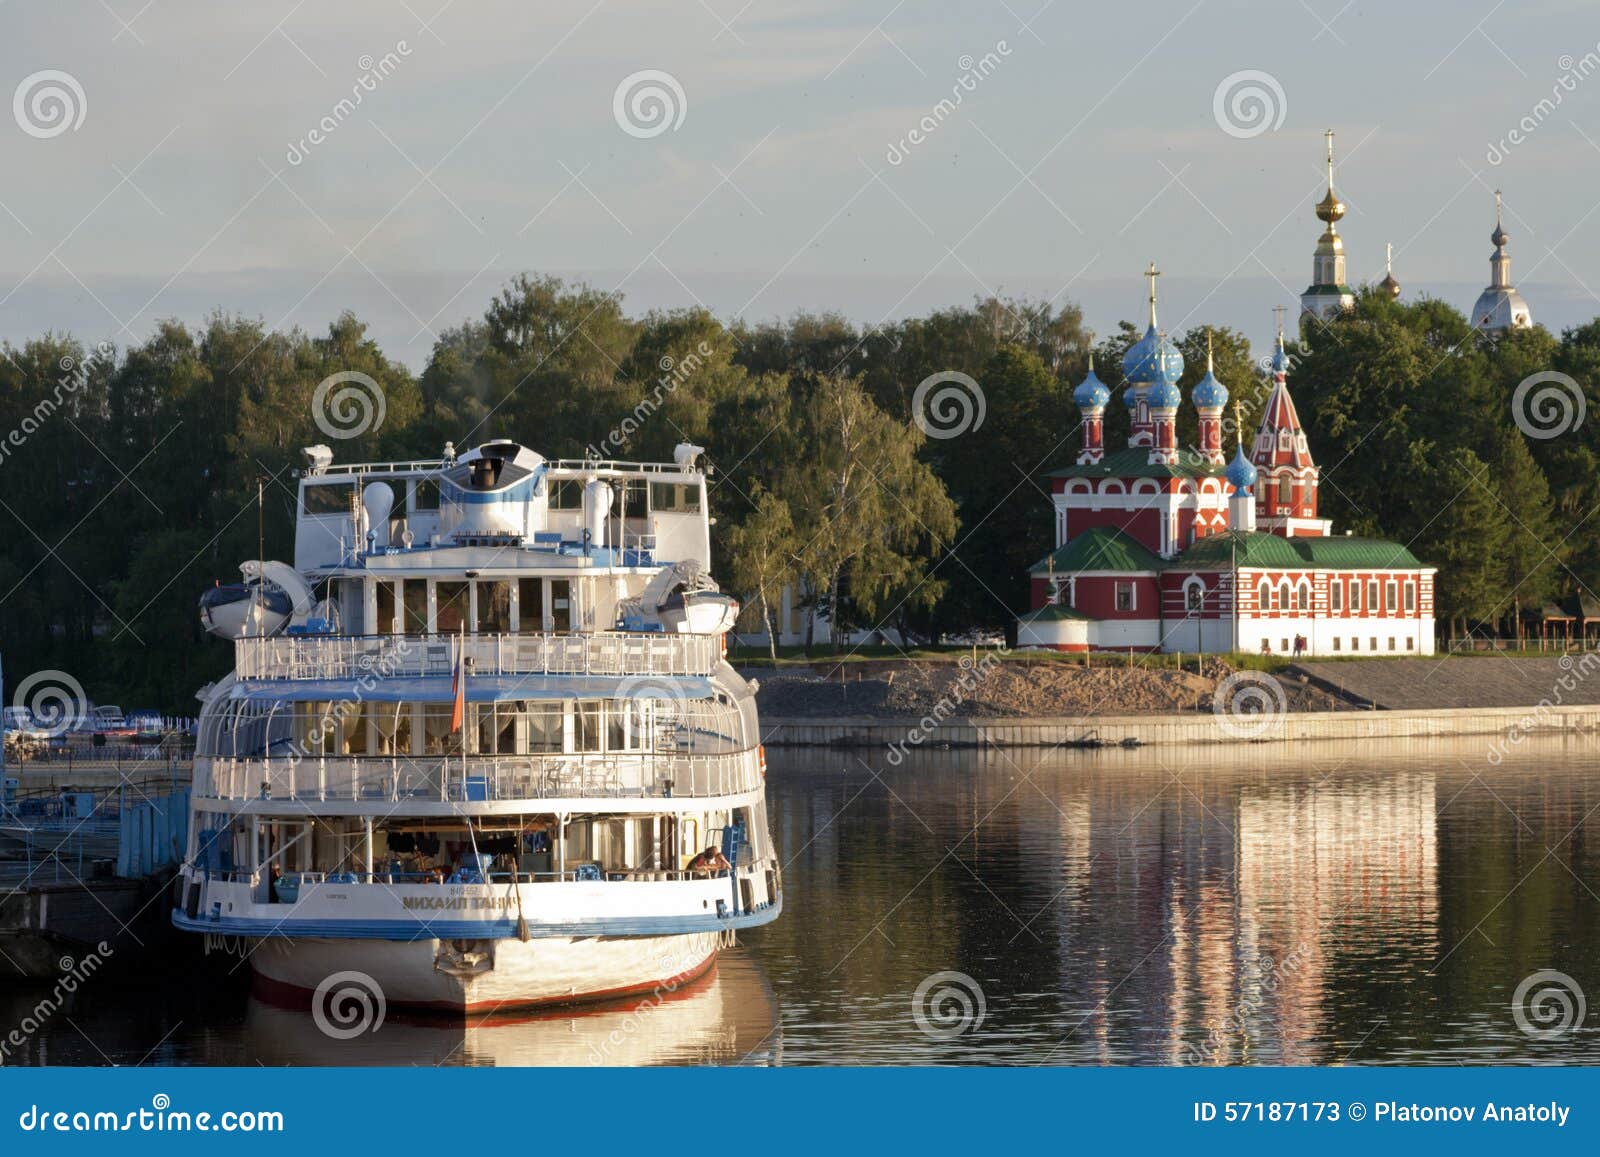 an evening is in uglich.